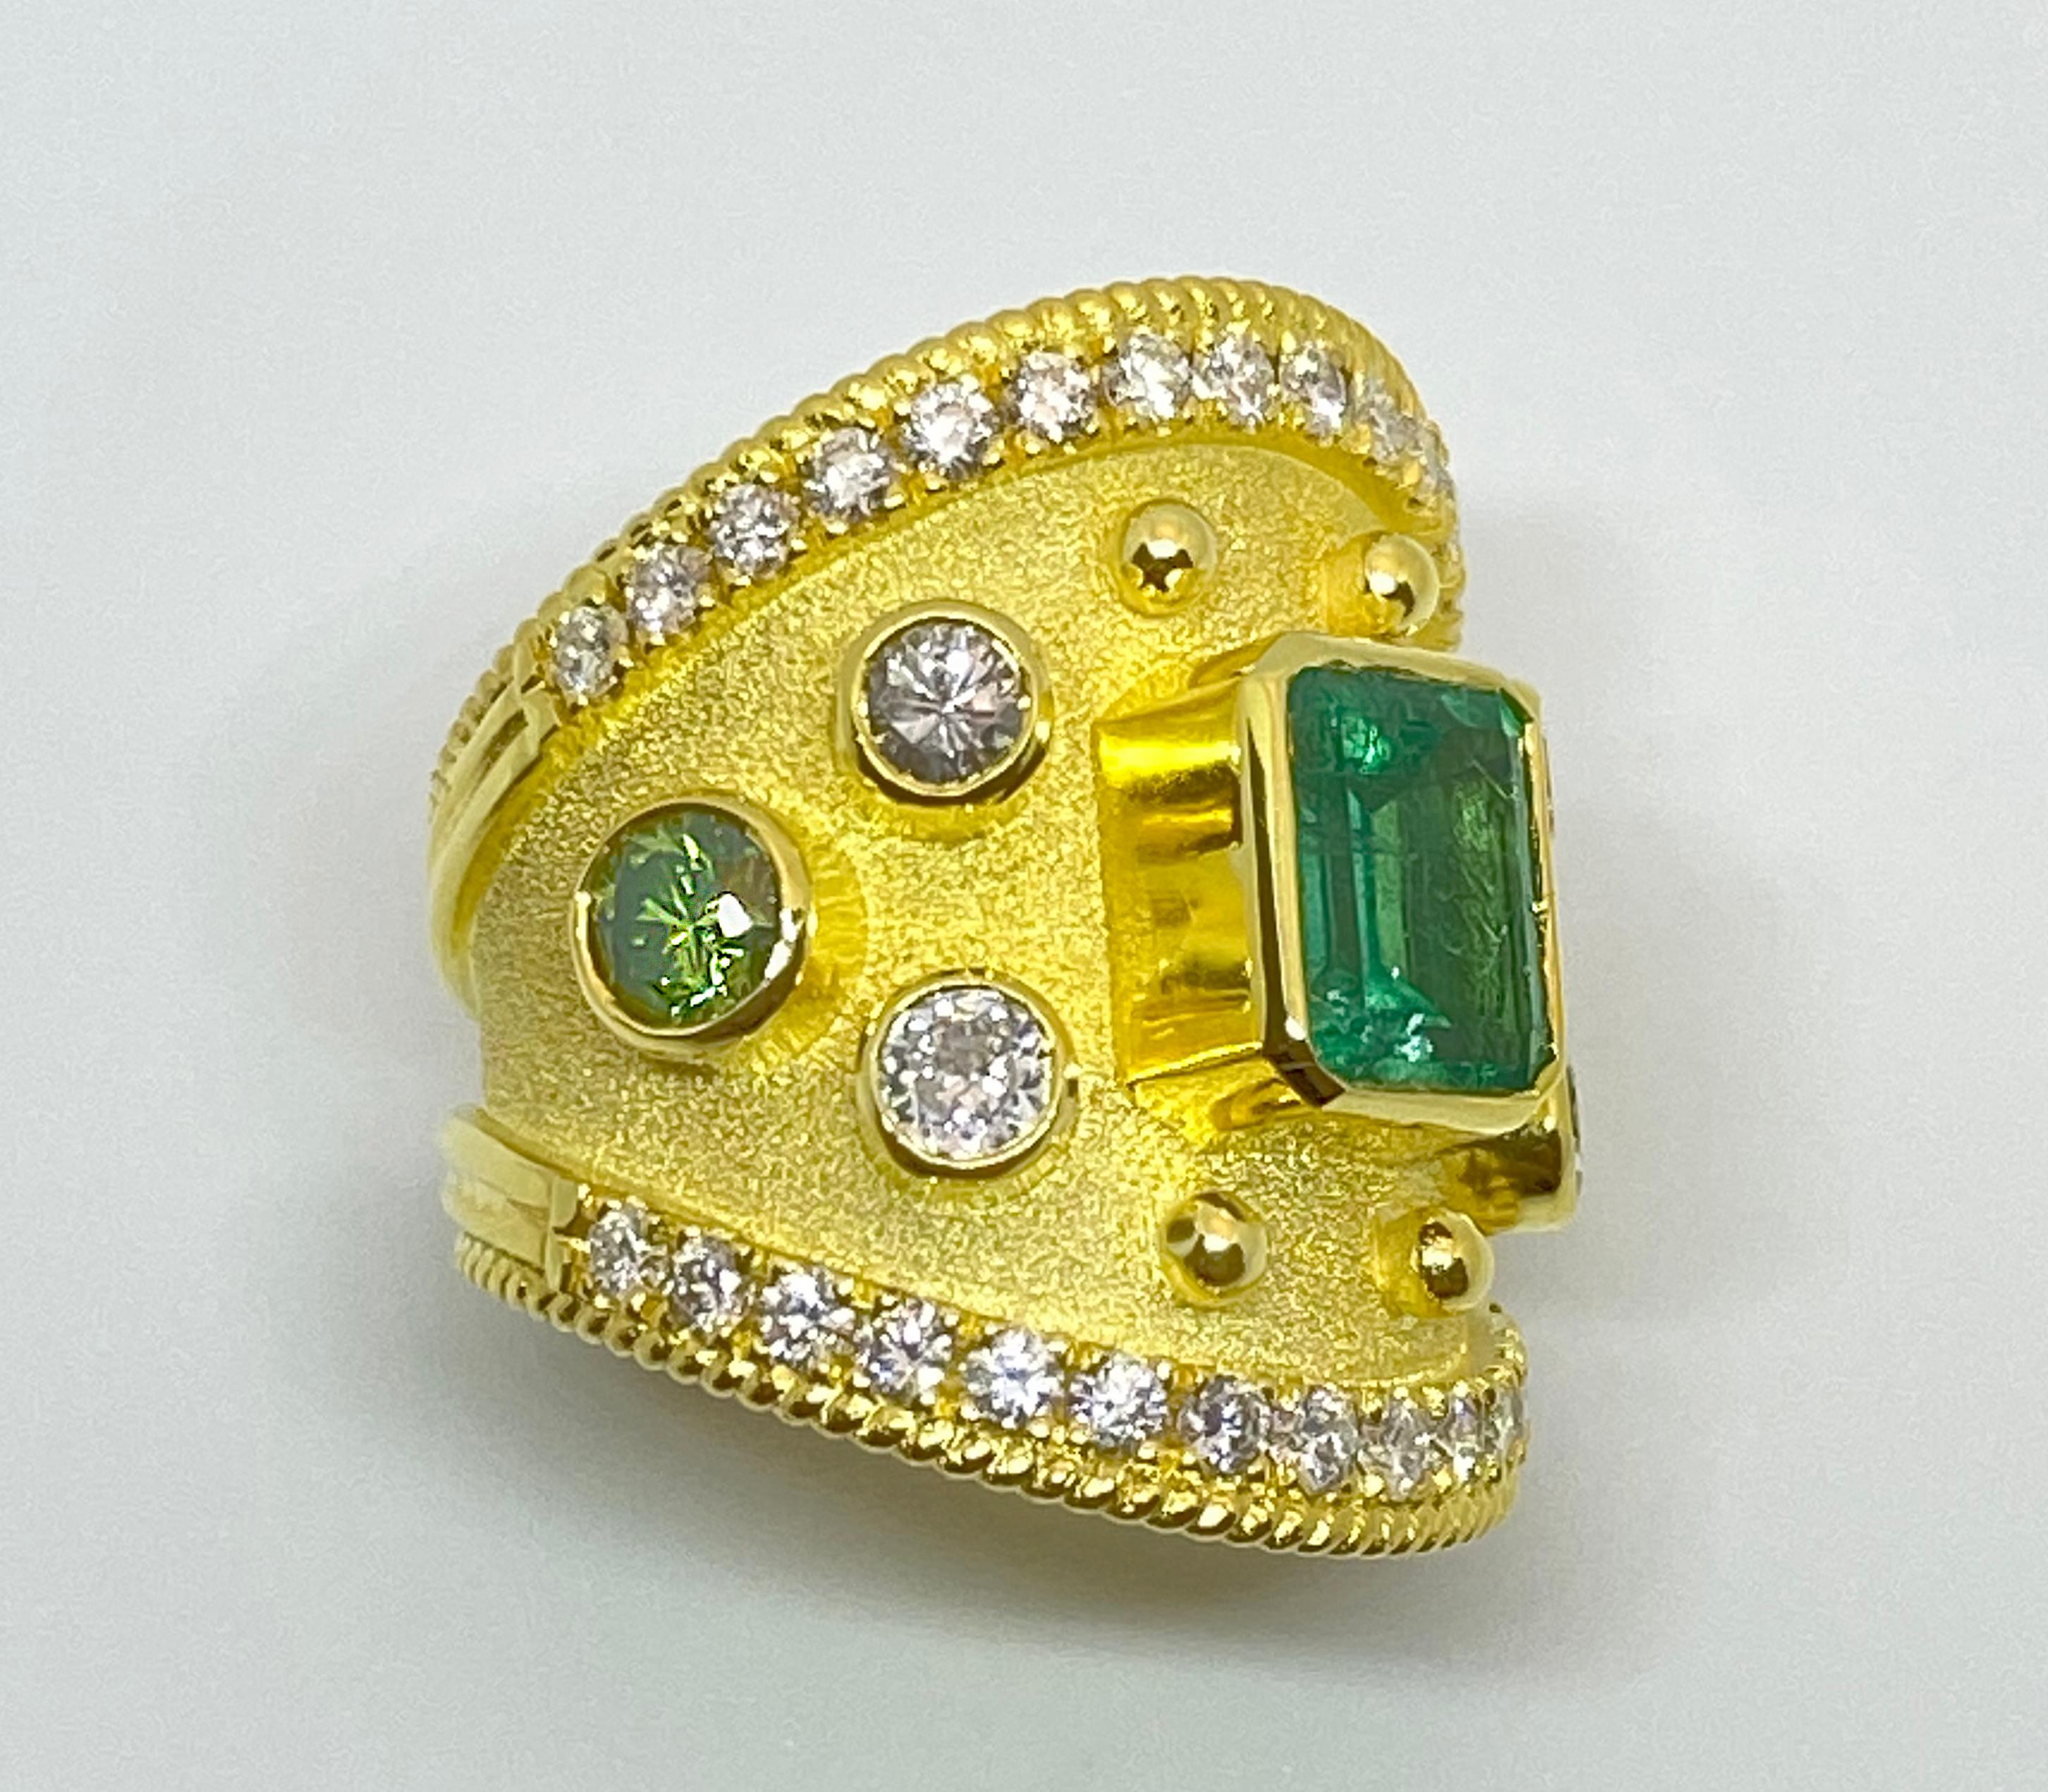 This S.Georgios designer 18 Karat Yellow Gold Band Ring is all handmade with a Byzantine Granulation Workmanship and a unique velvet background. This gorgeous band features in the center an Emerald cut natural Emerald total weight of 1.65 Carats, 4